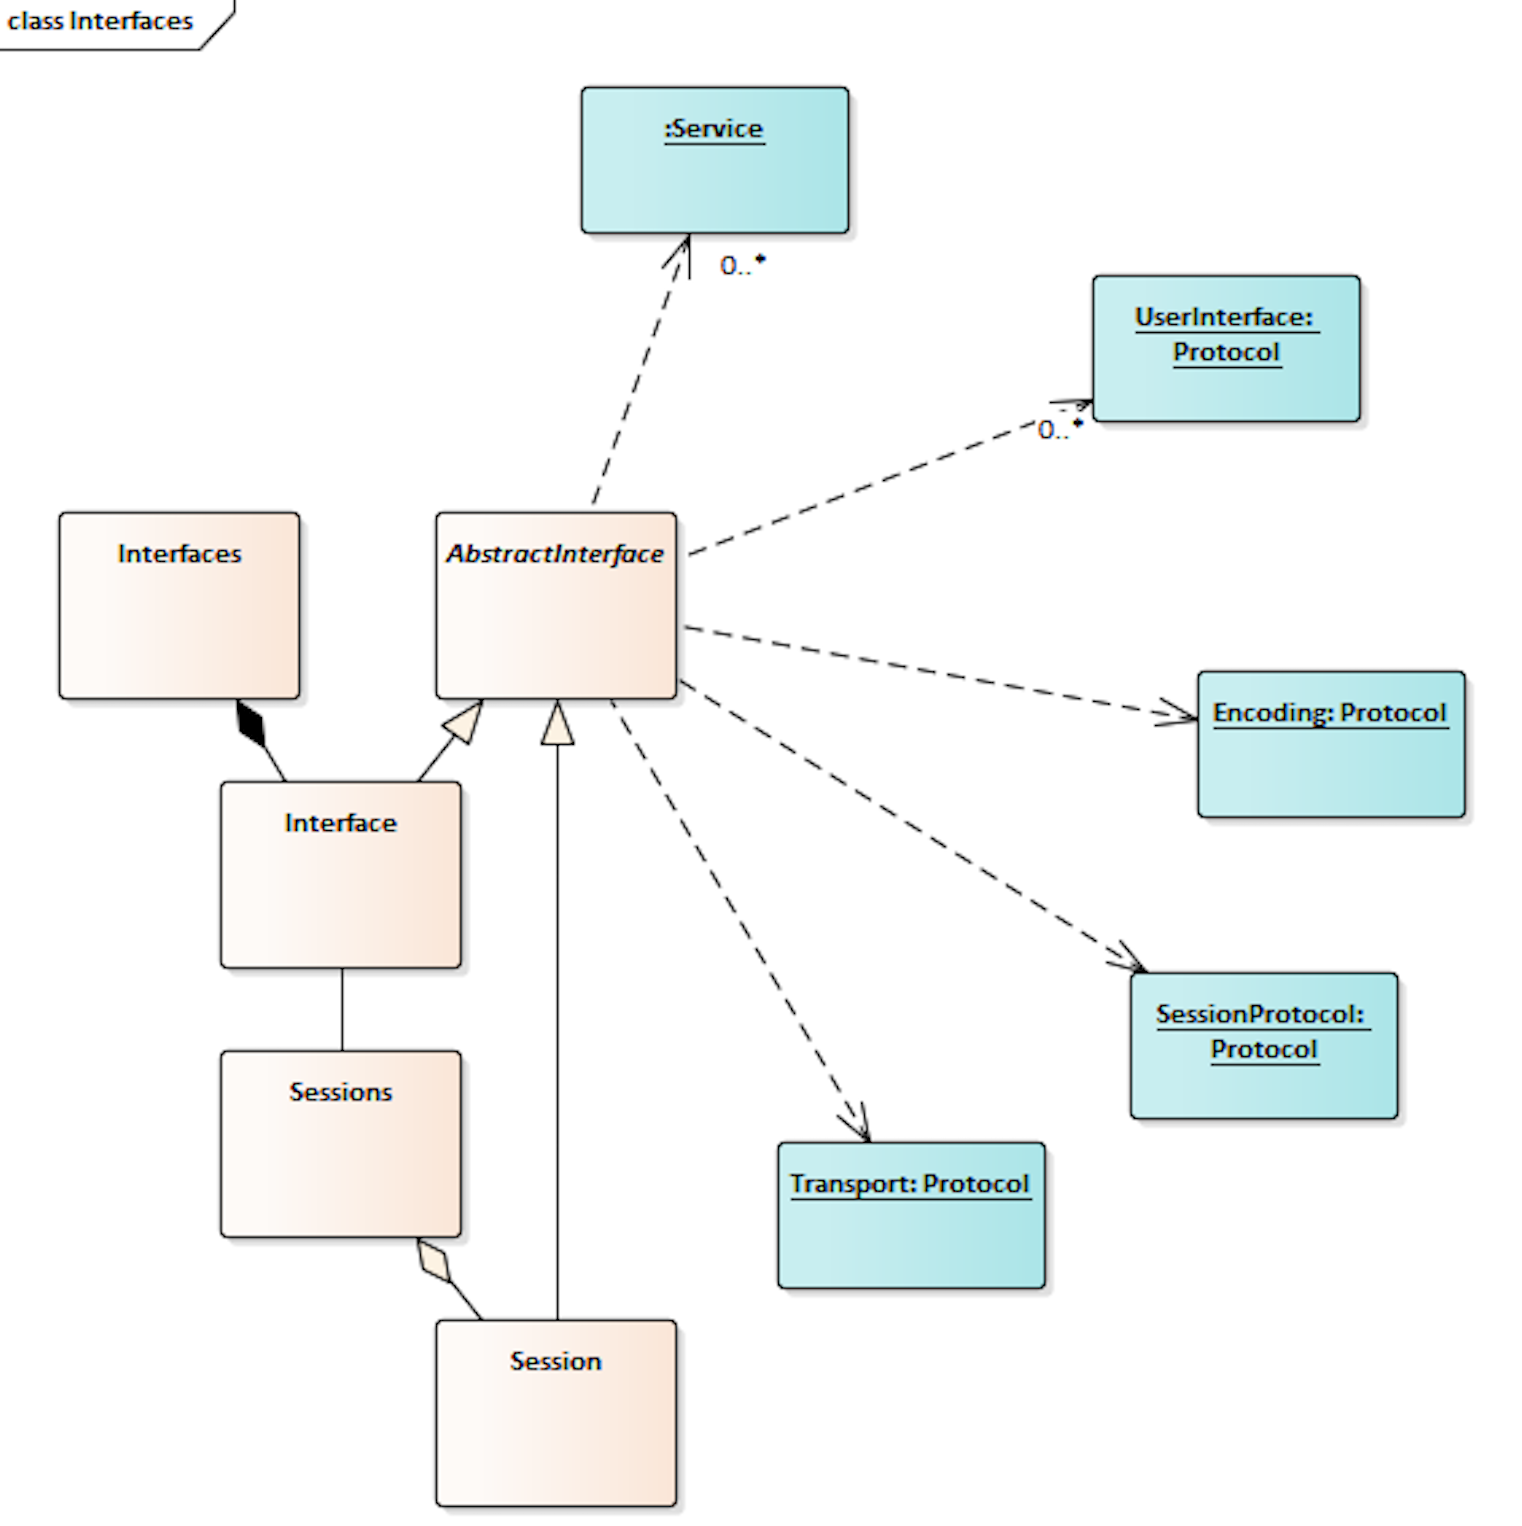 Orchestra Interfaces Metamodel – Session Provisioning